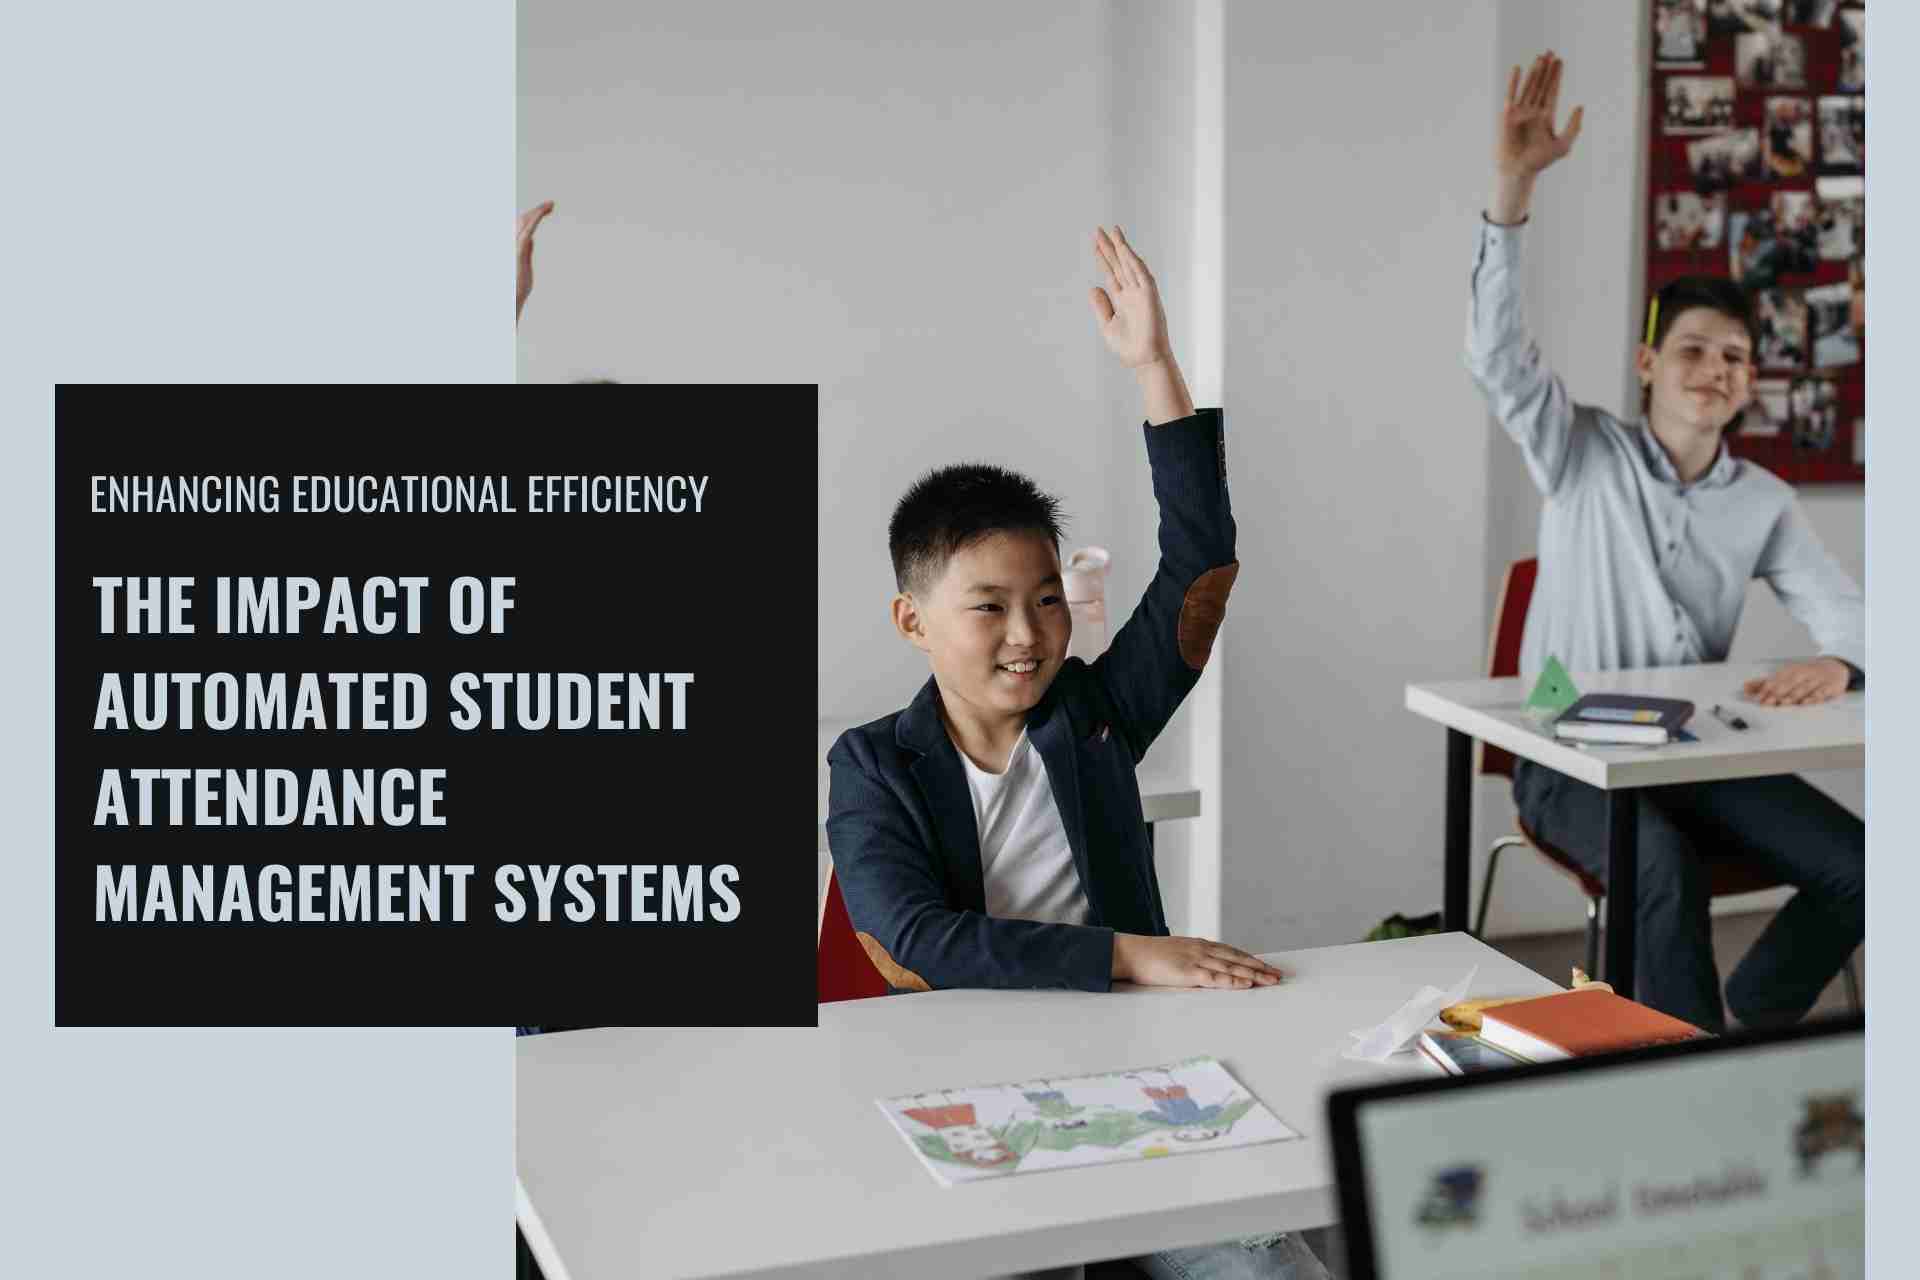 Enhancing Educational Efficiency: The Impact of Automated Student Attendance Management Systems